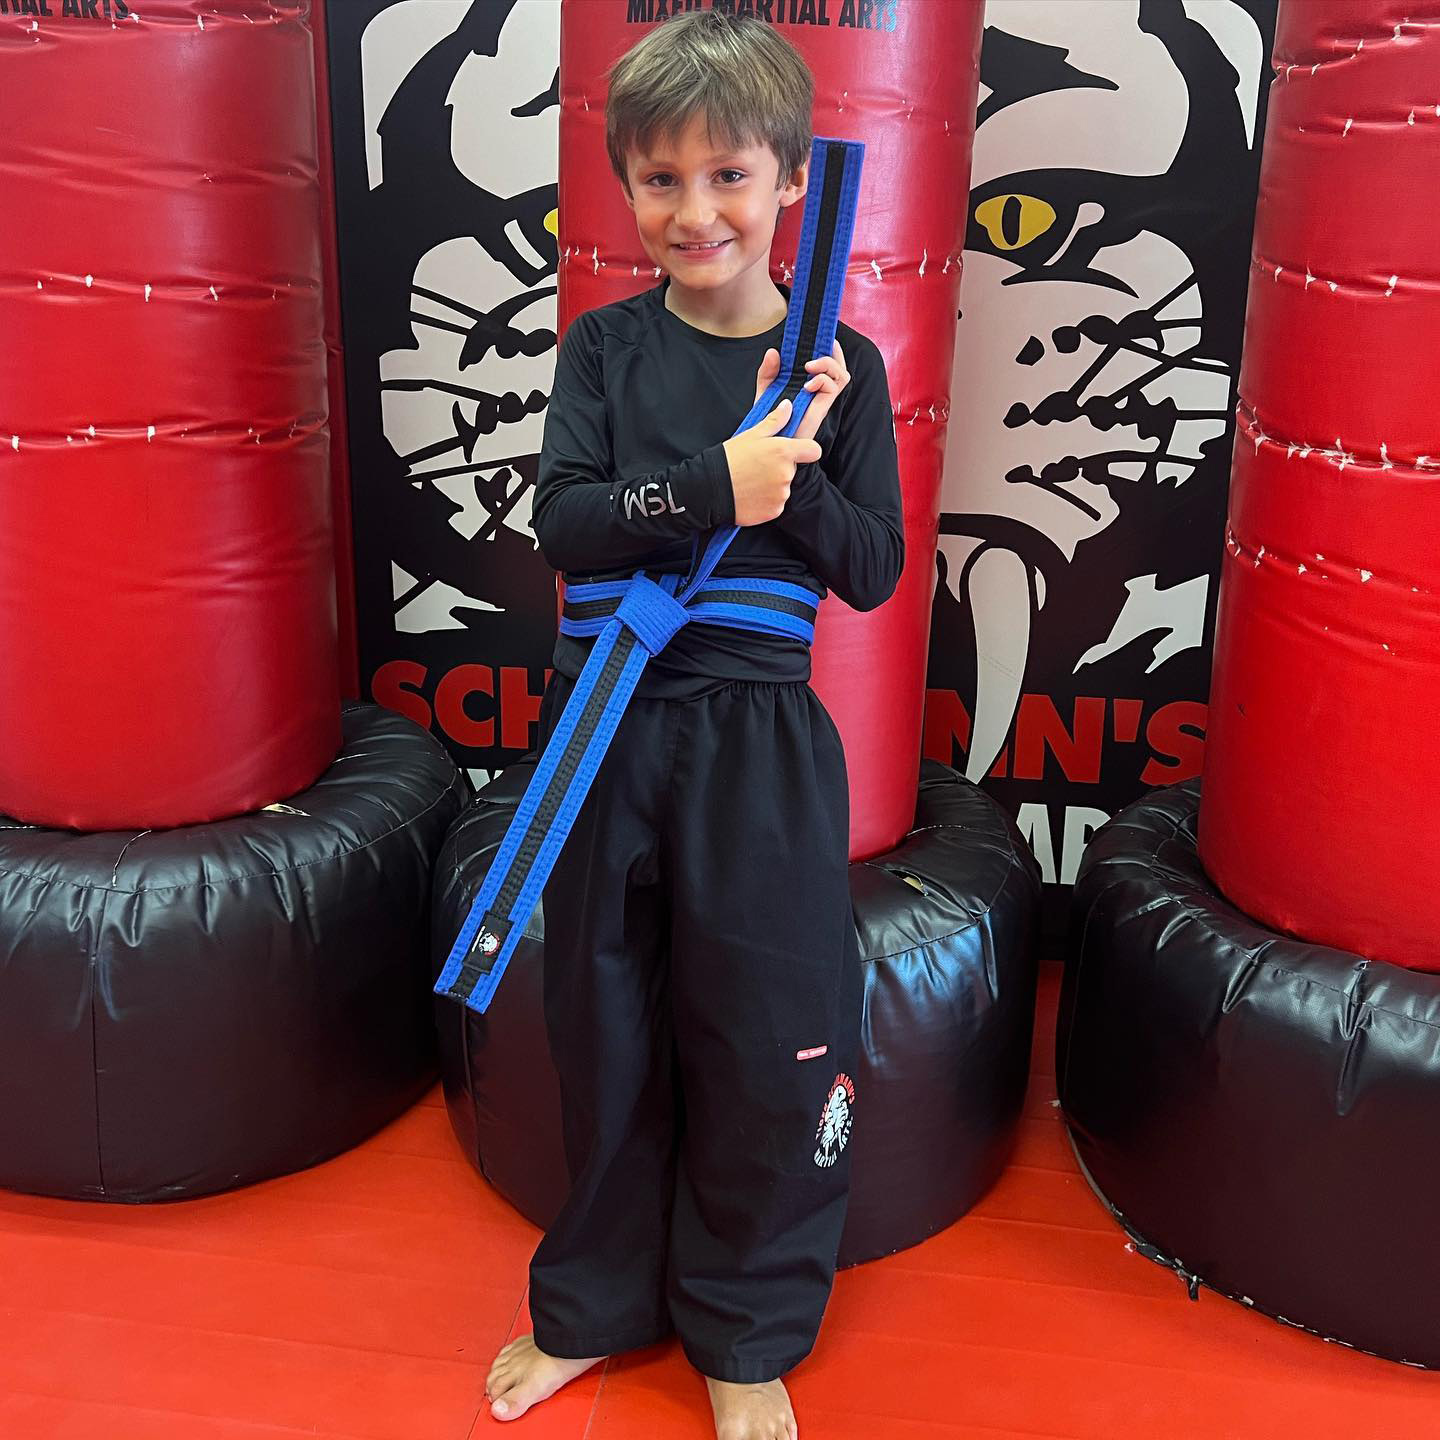 A boy proudly showing his martial arts blue belt at Tiger Schulmann's Eatontown